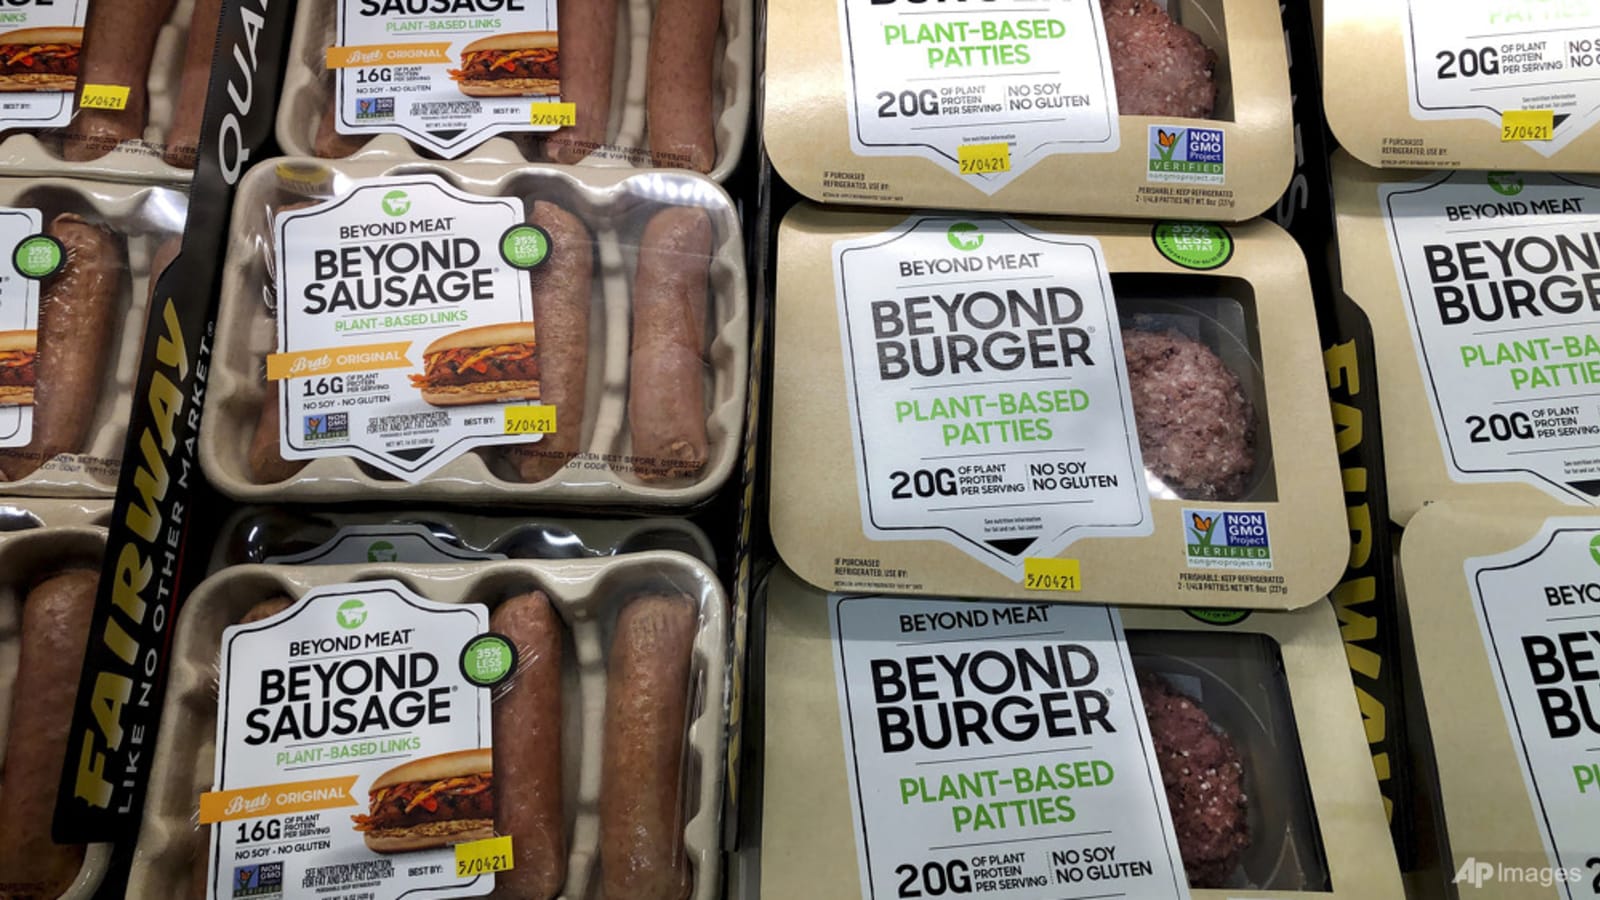 rising-prices-could-sour-consumer-appetite-for-plant-based-meat-alternatives